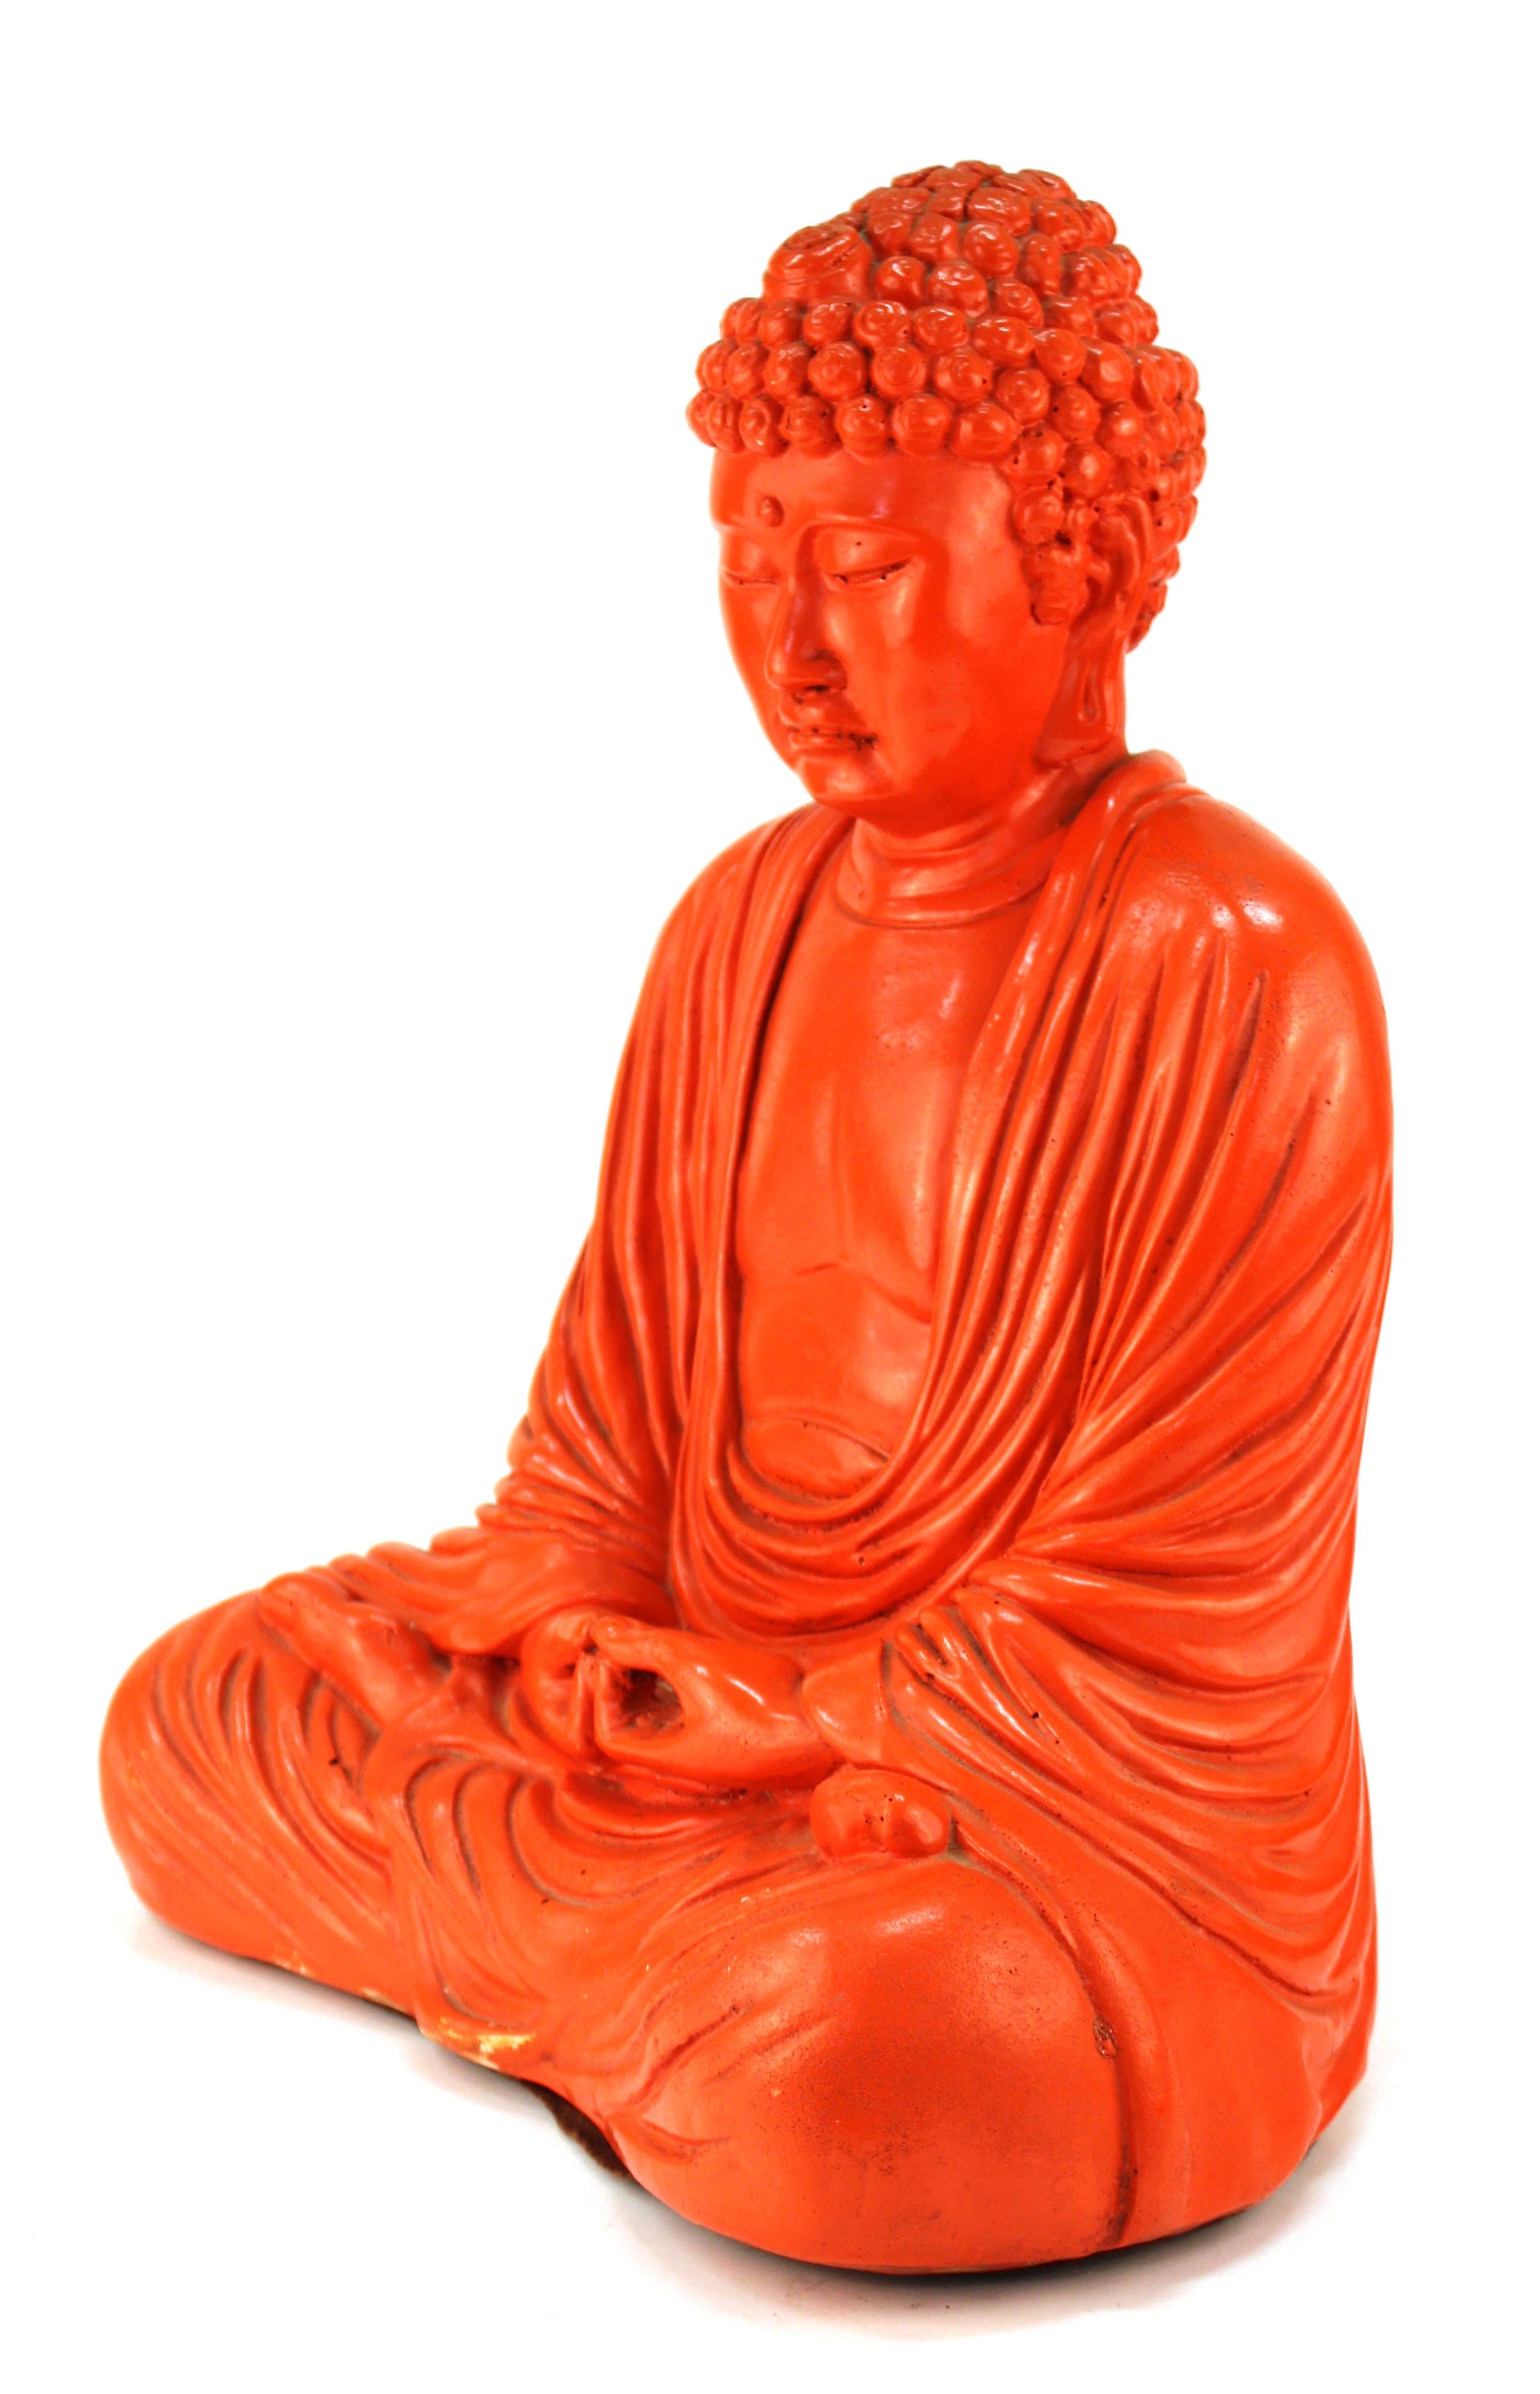 Midcentury style painted plaster seated Buddha figure, painted in orange. The piece is in good vintage condition, with some chips to the paint and plaster.